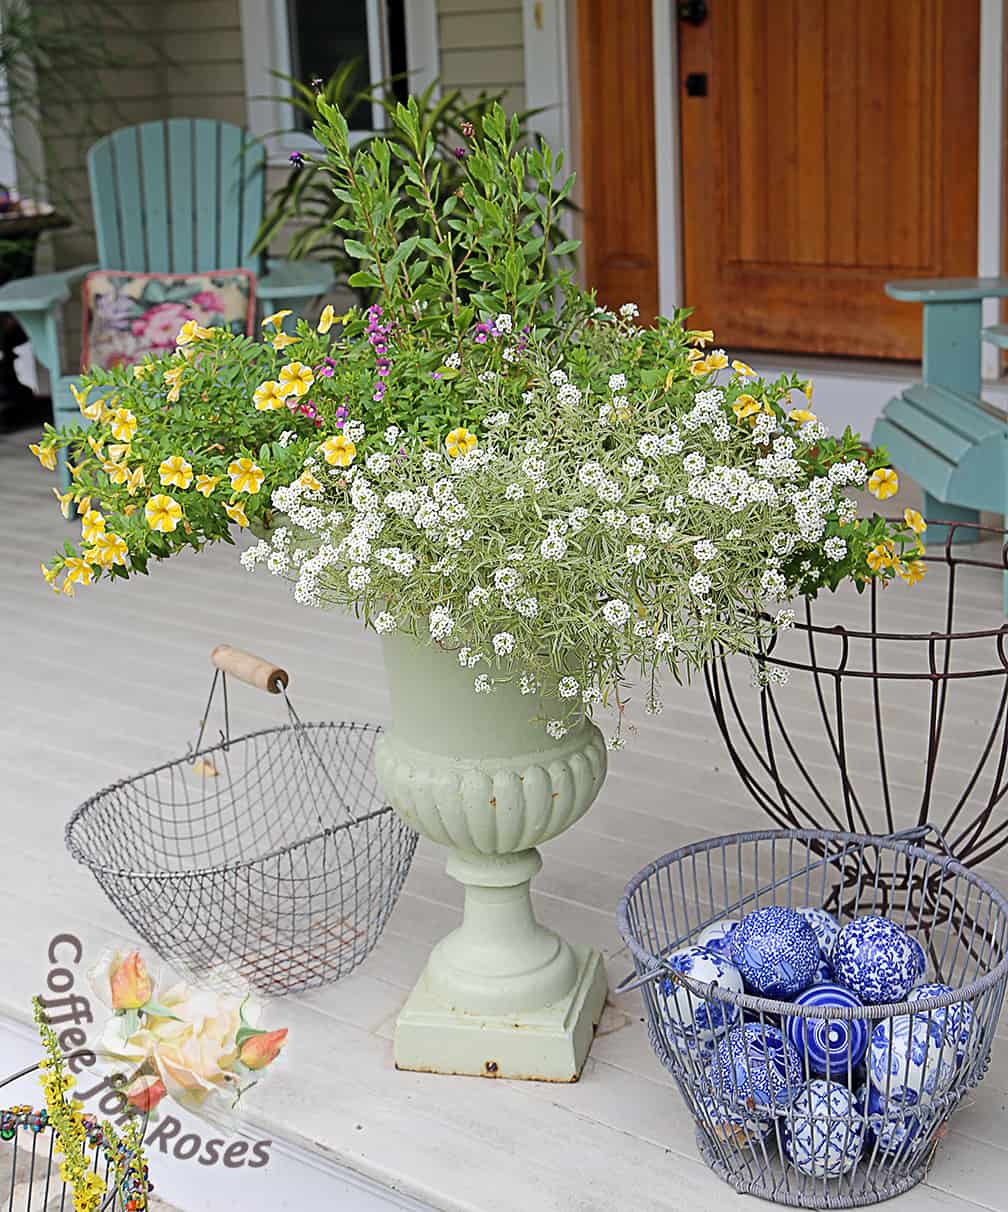 Here is how this same urn looks today, on July 24th. The Lemon Slice and Frosty Knight are going strong. There are a few flowers on the Blue Bird Nemesia, and if I cut them back now they should come back with renewed flowering soon. But the Osteospermum? It's really done. You can see the tall, lanky green foliage in the center of the pot. Since this isn't bringing anything to the party, it's time to replace that center plant.